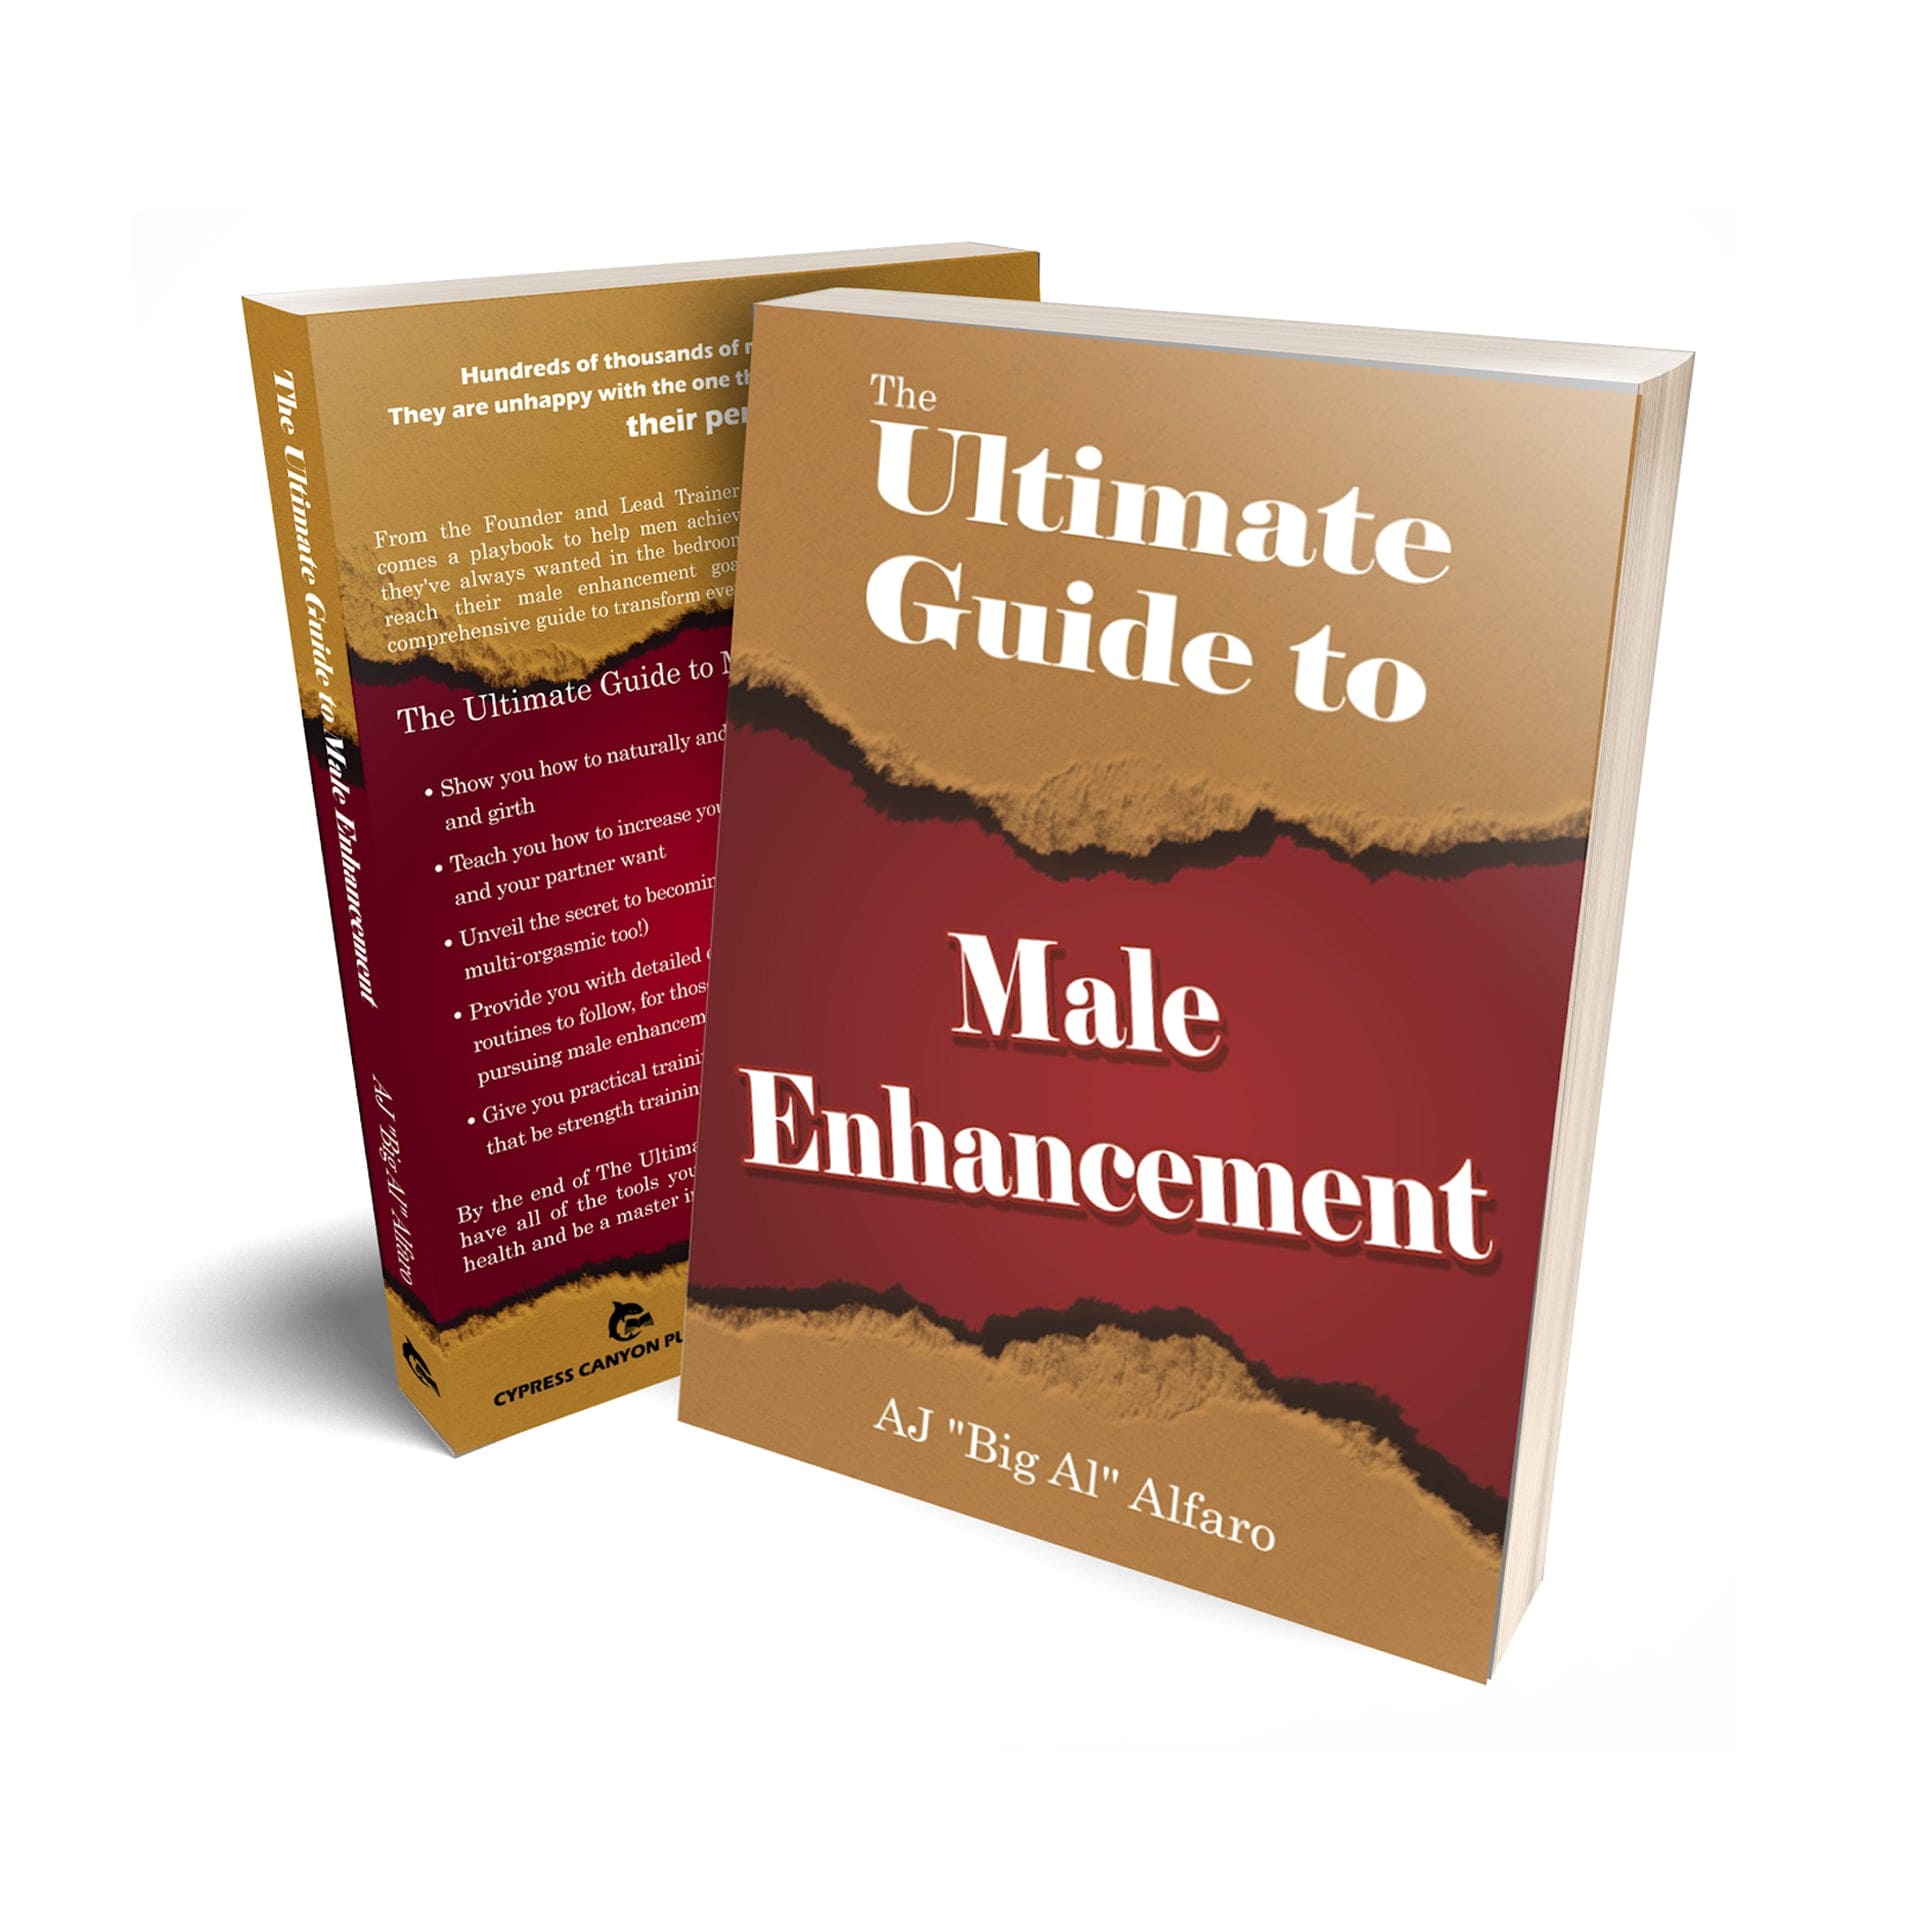 The Ultimate Guide to Male Enhancement